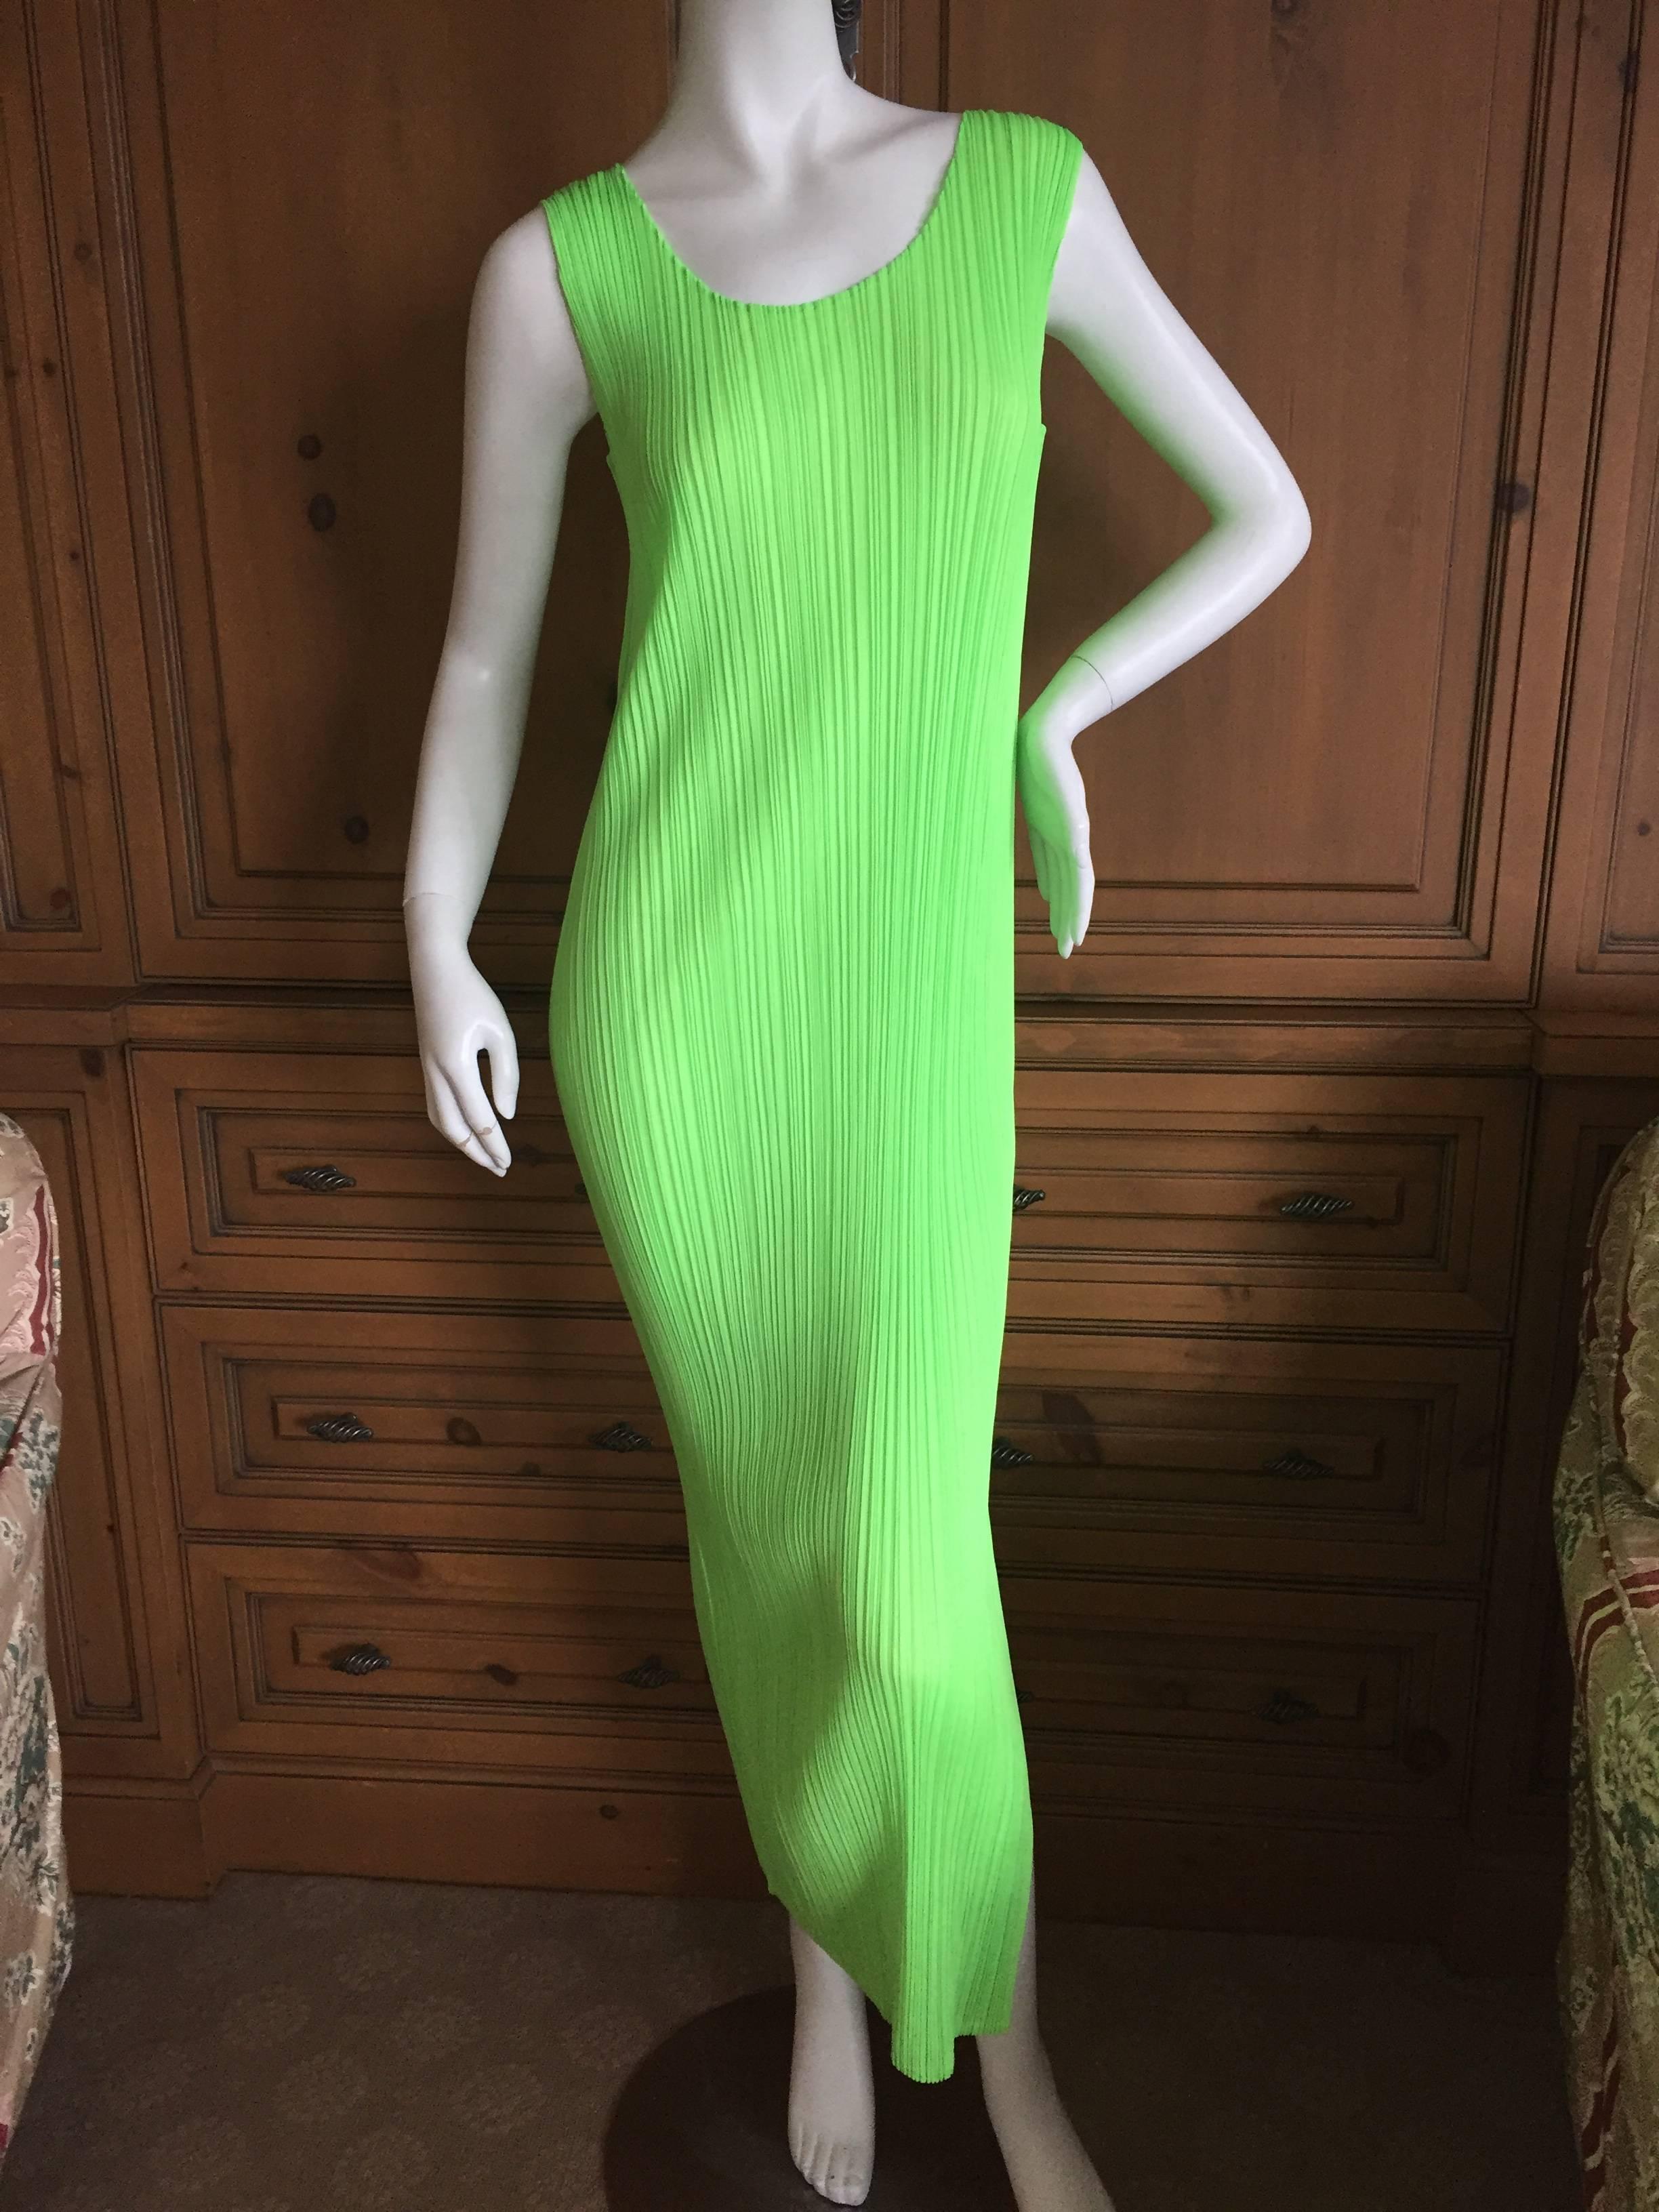 Iconic neon green pleated sheath dress with side slit from Pleats Please Issey Miyake.
Japanese size 3
There is a lot of stretch to this pleated fabric.
Bust stretches from 34